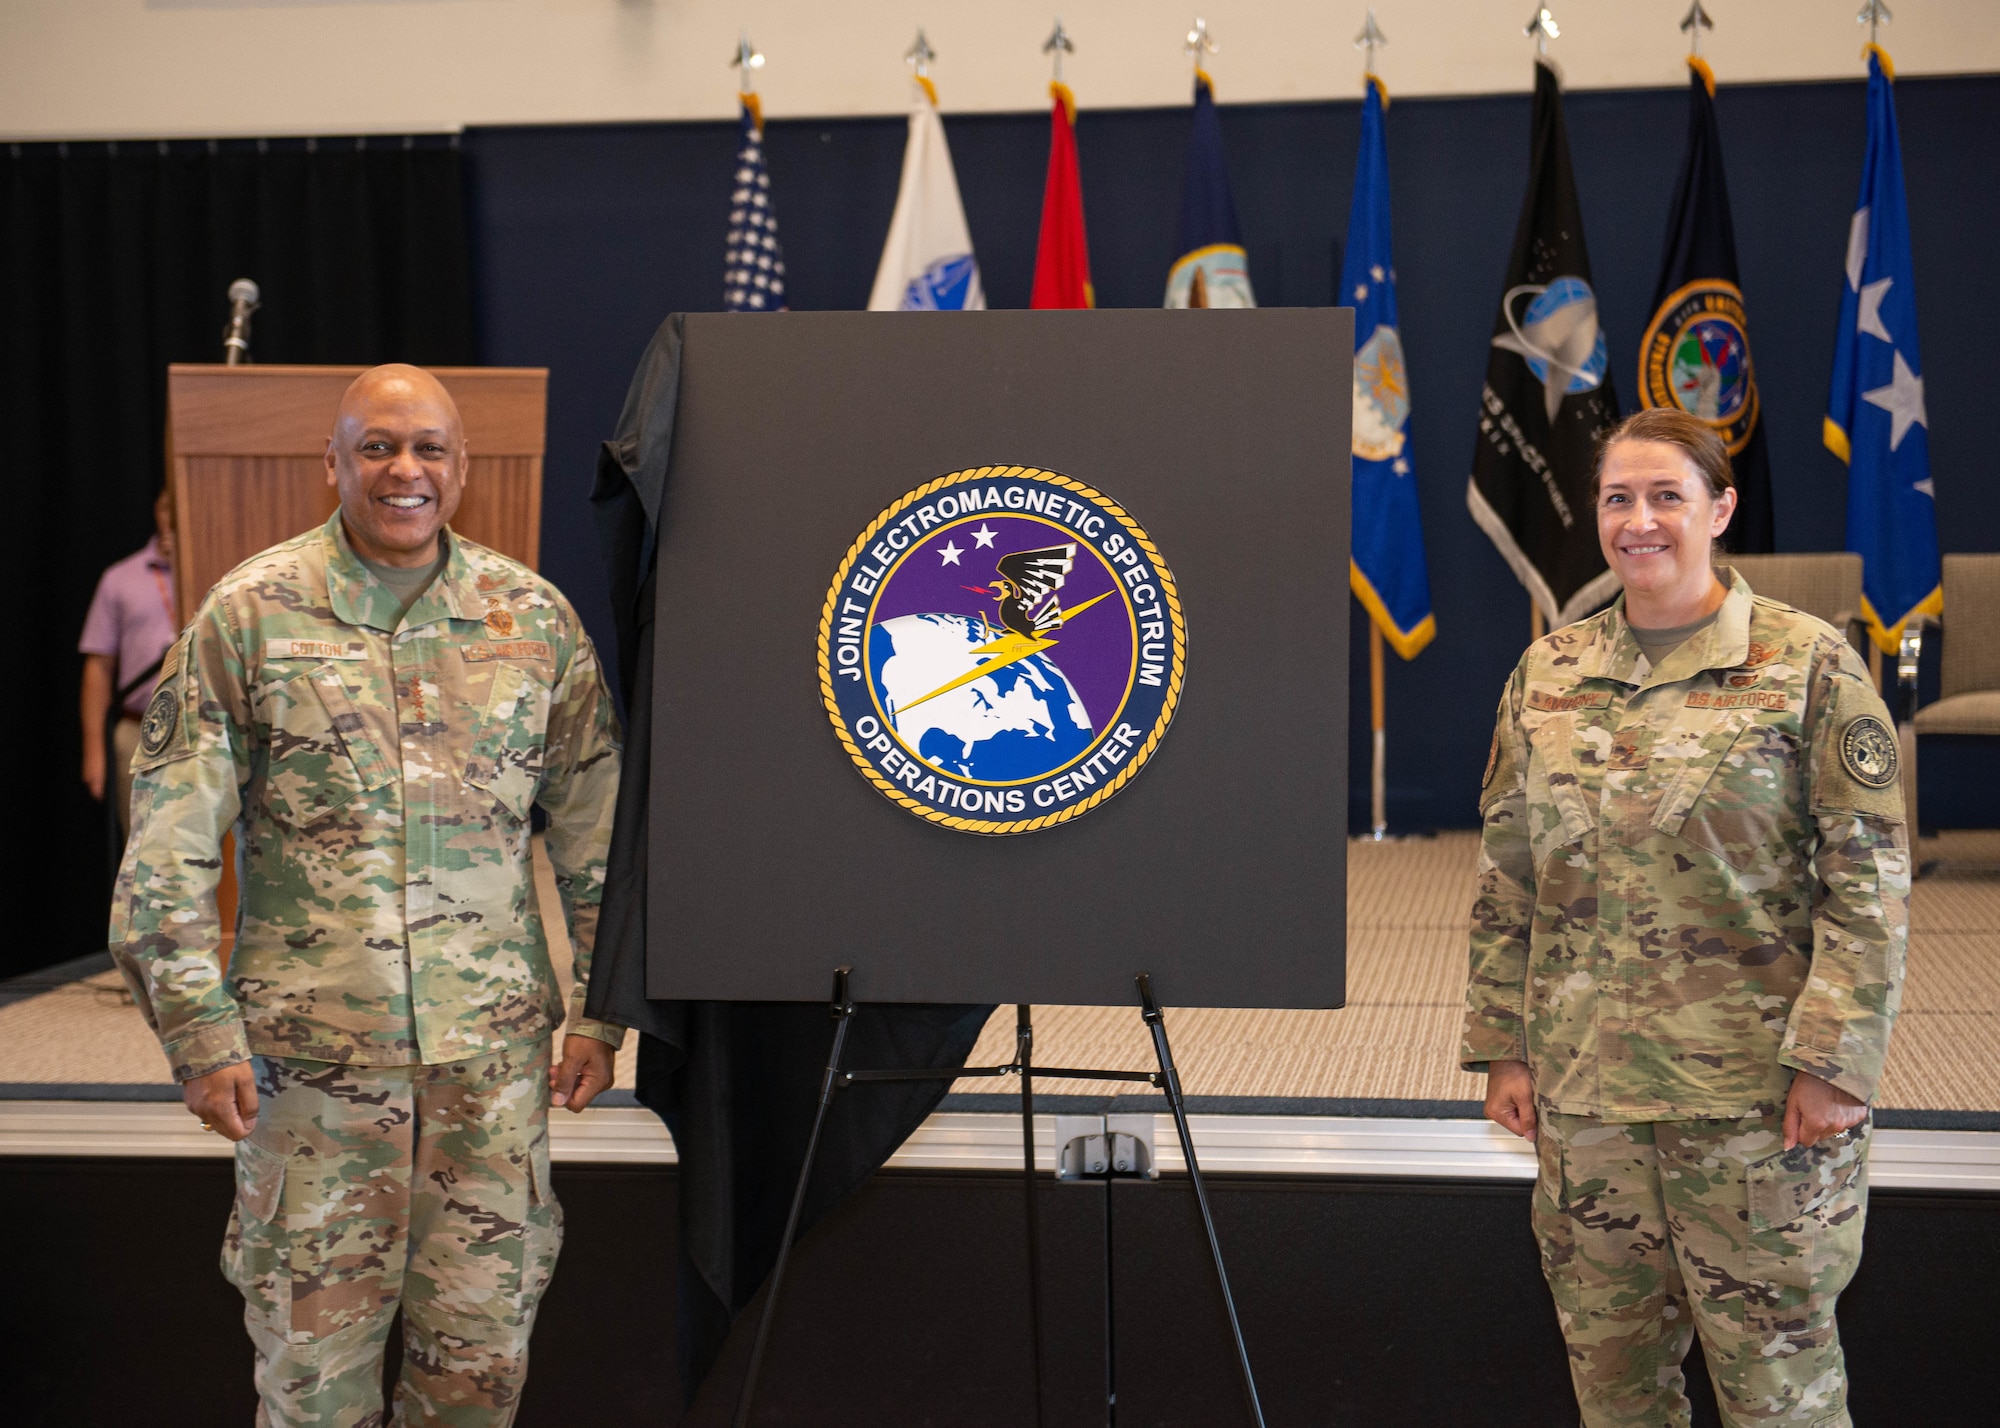 U.S. Strategic Command (USSTRATCOM) officially stood up the Joint Electromagnetic Spectrum (EMS) Operations Center (JEC) during a ceremony at USSTRATCOM today. The JEC will serve as the heart of the Department of Defense's Electromagnetic Spectrum Operations with the primary goal of restructuring accounts for force management, planning, situation monitoring, decision-making, and force direction.